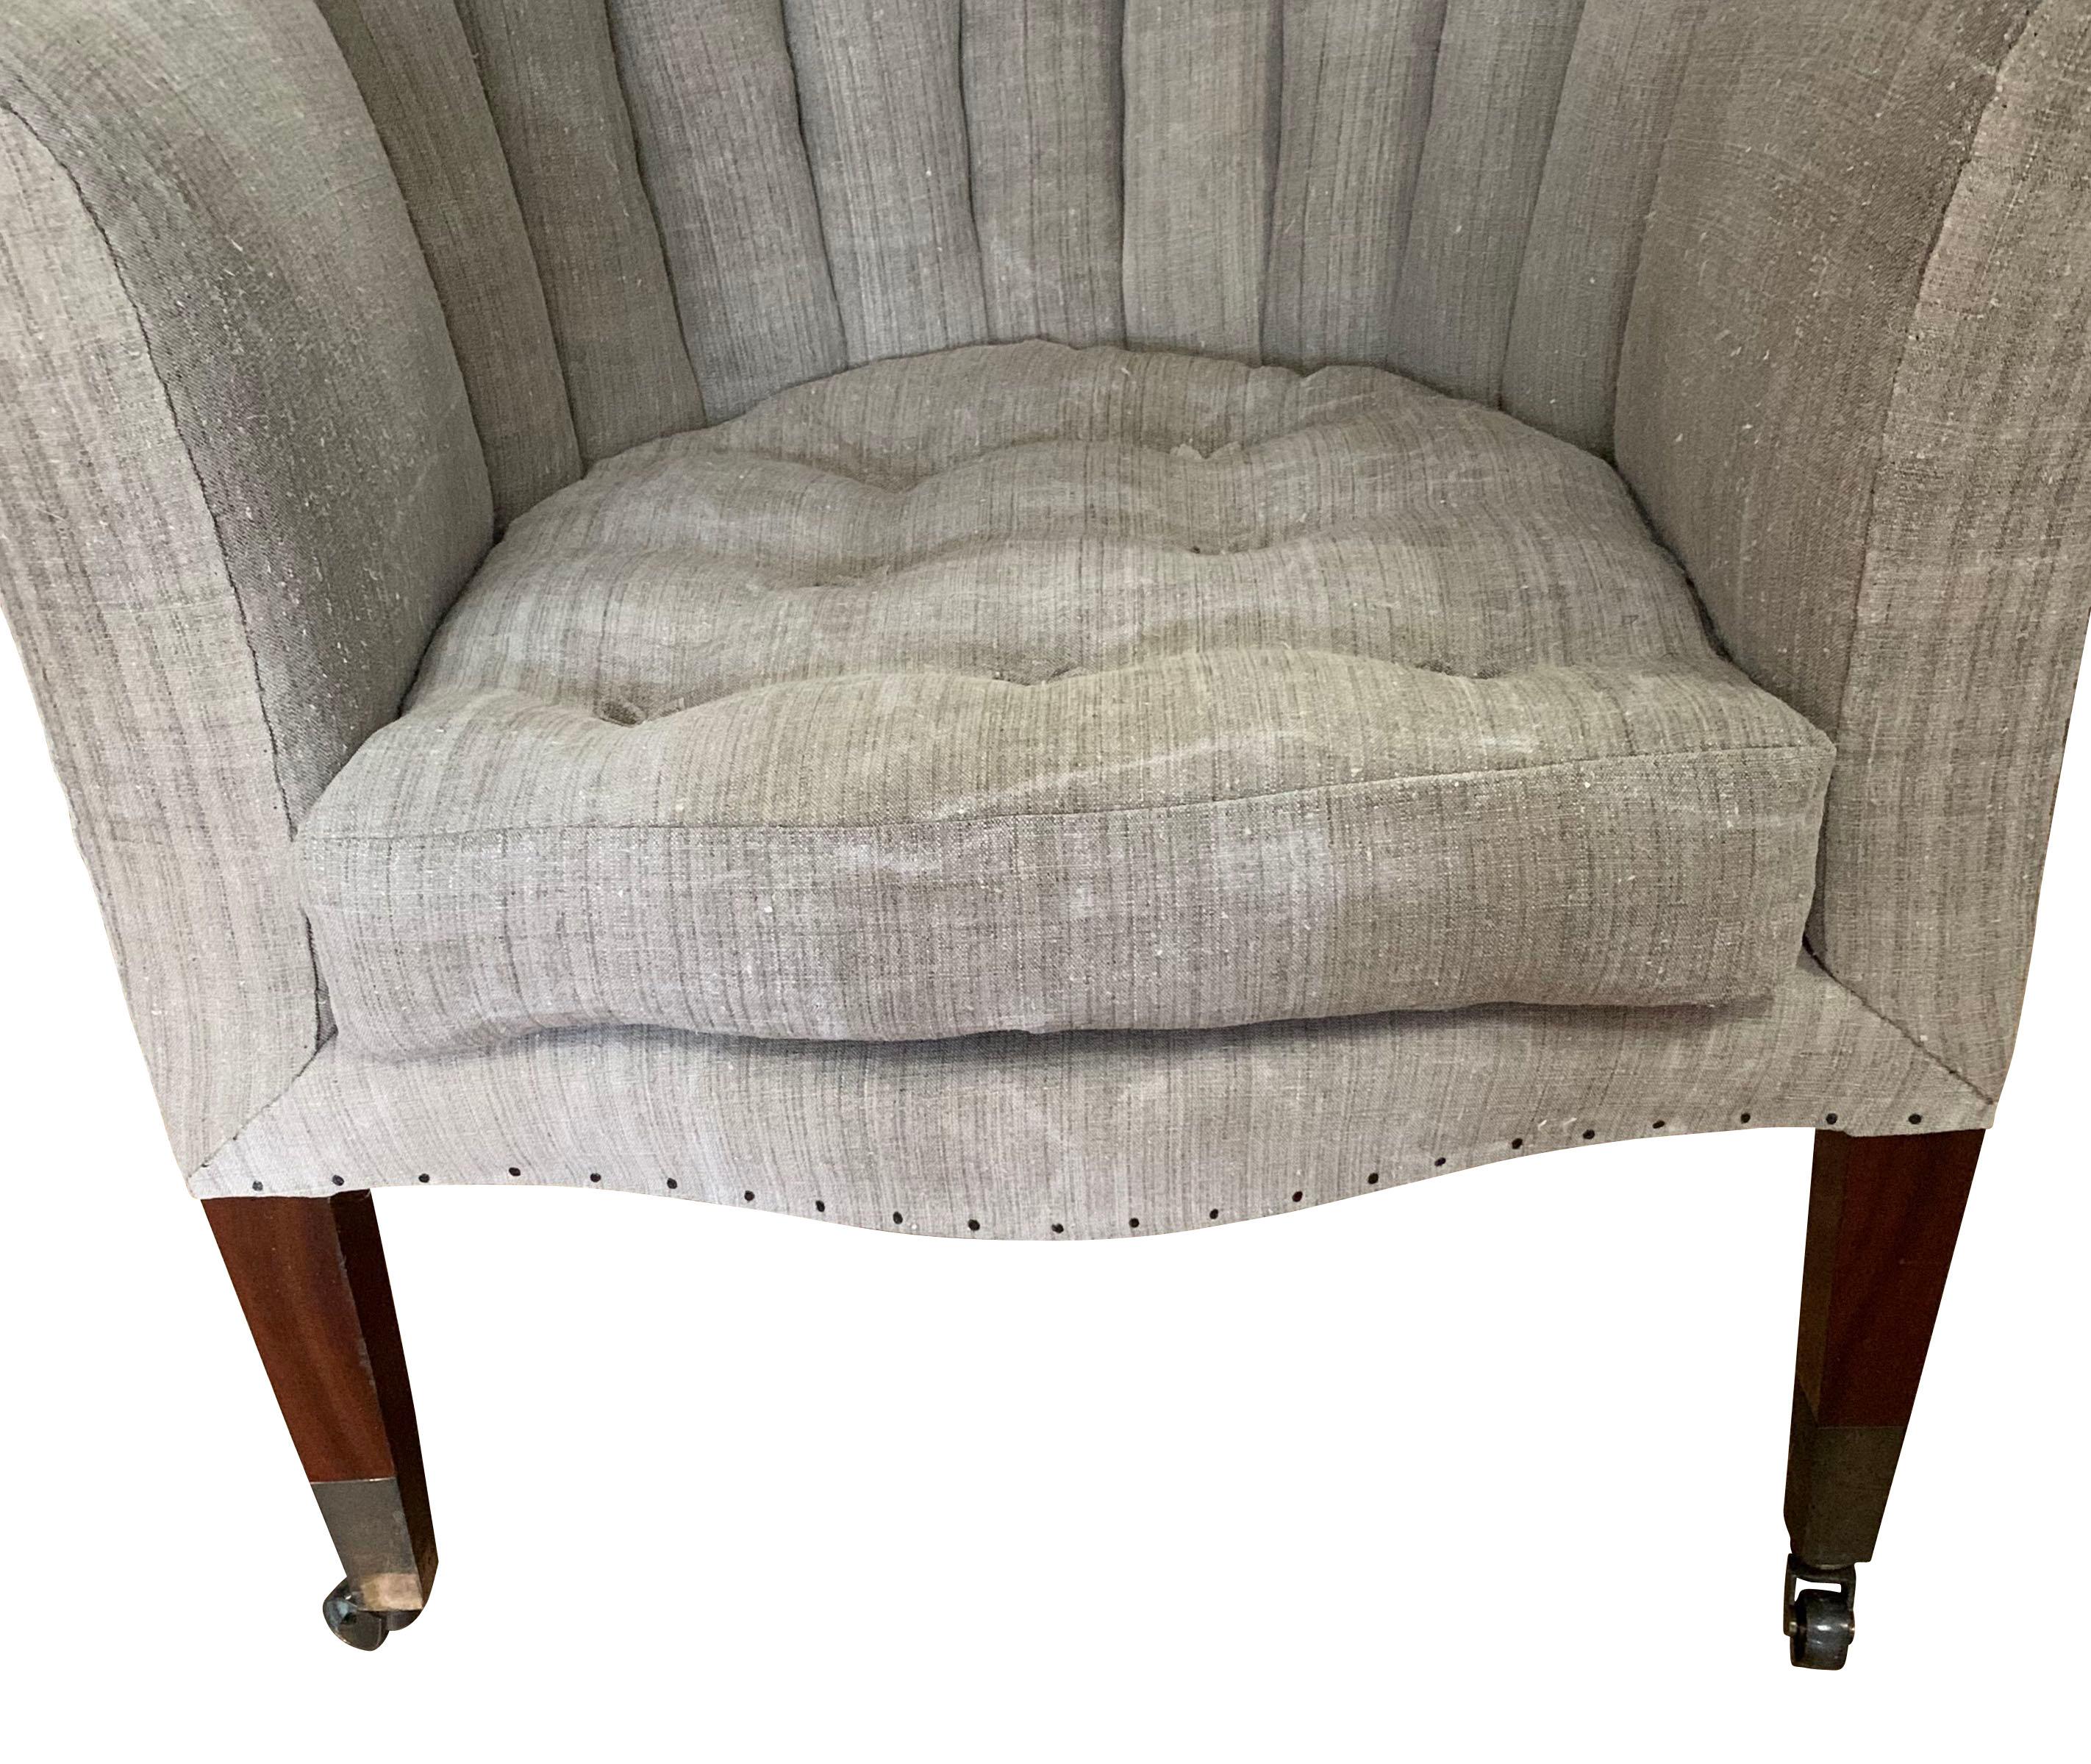 Linen Pair of Upholstered Armchairs, Barrel Back, England, 19th Century